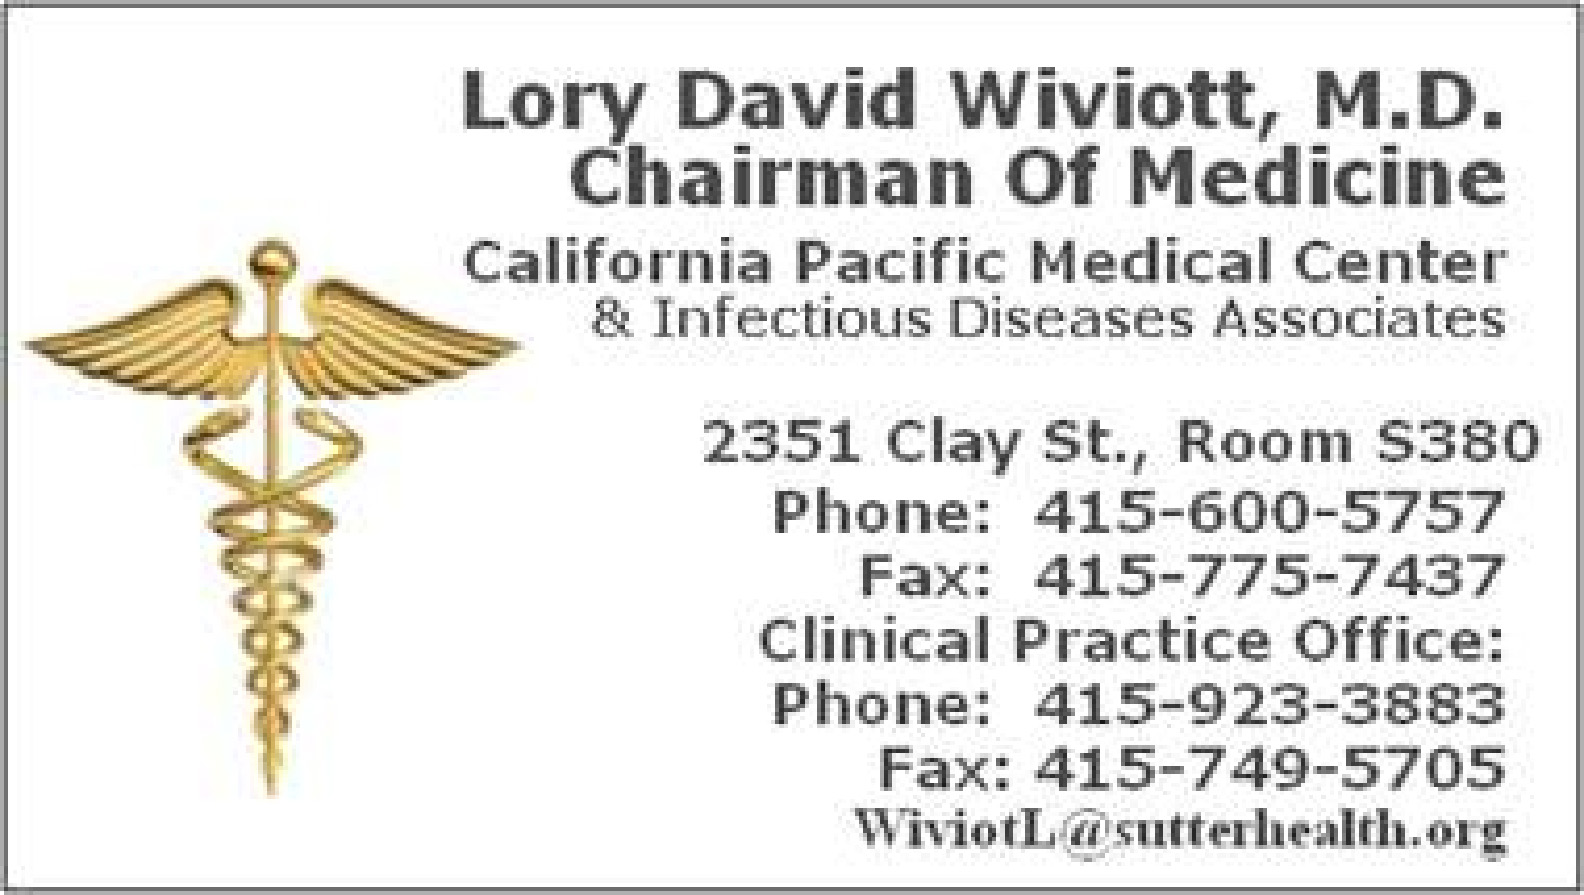 Dr. Wiviott's Business Card